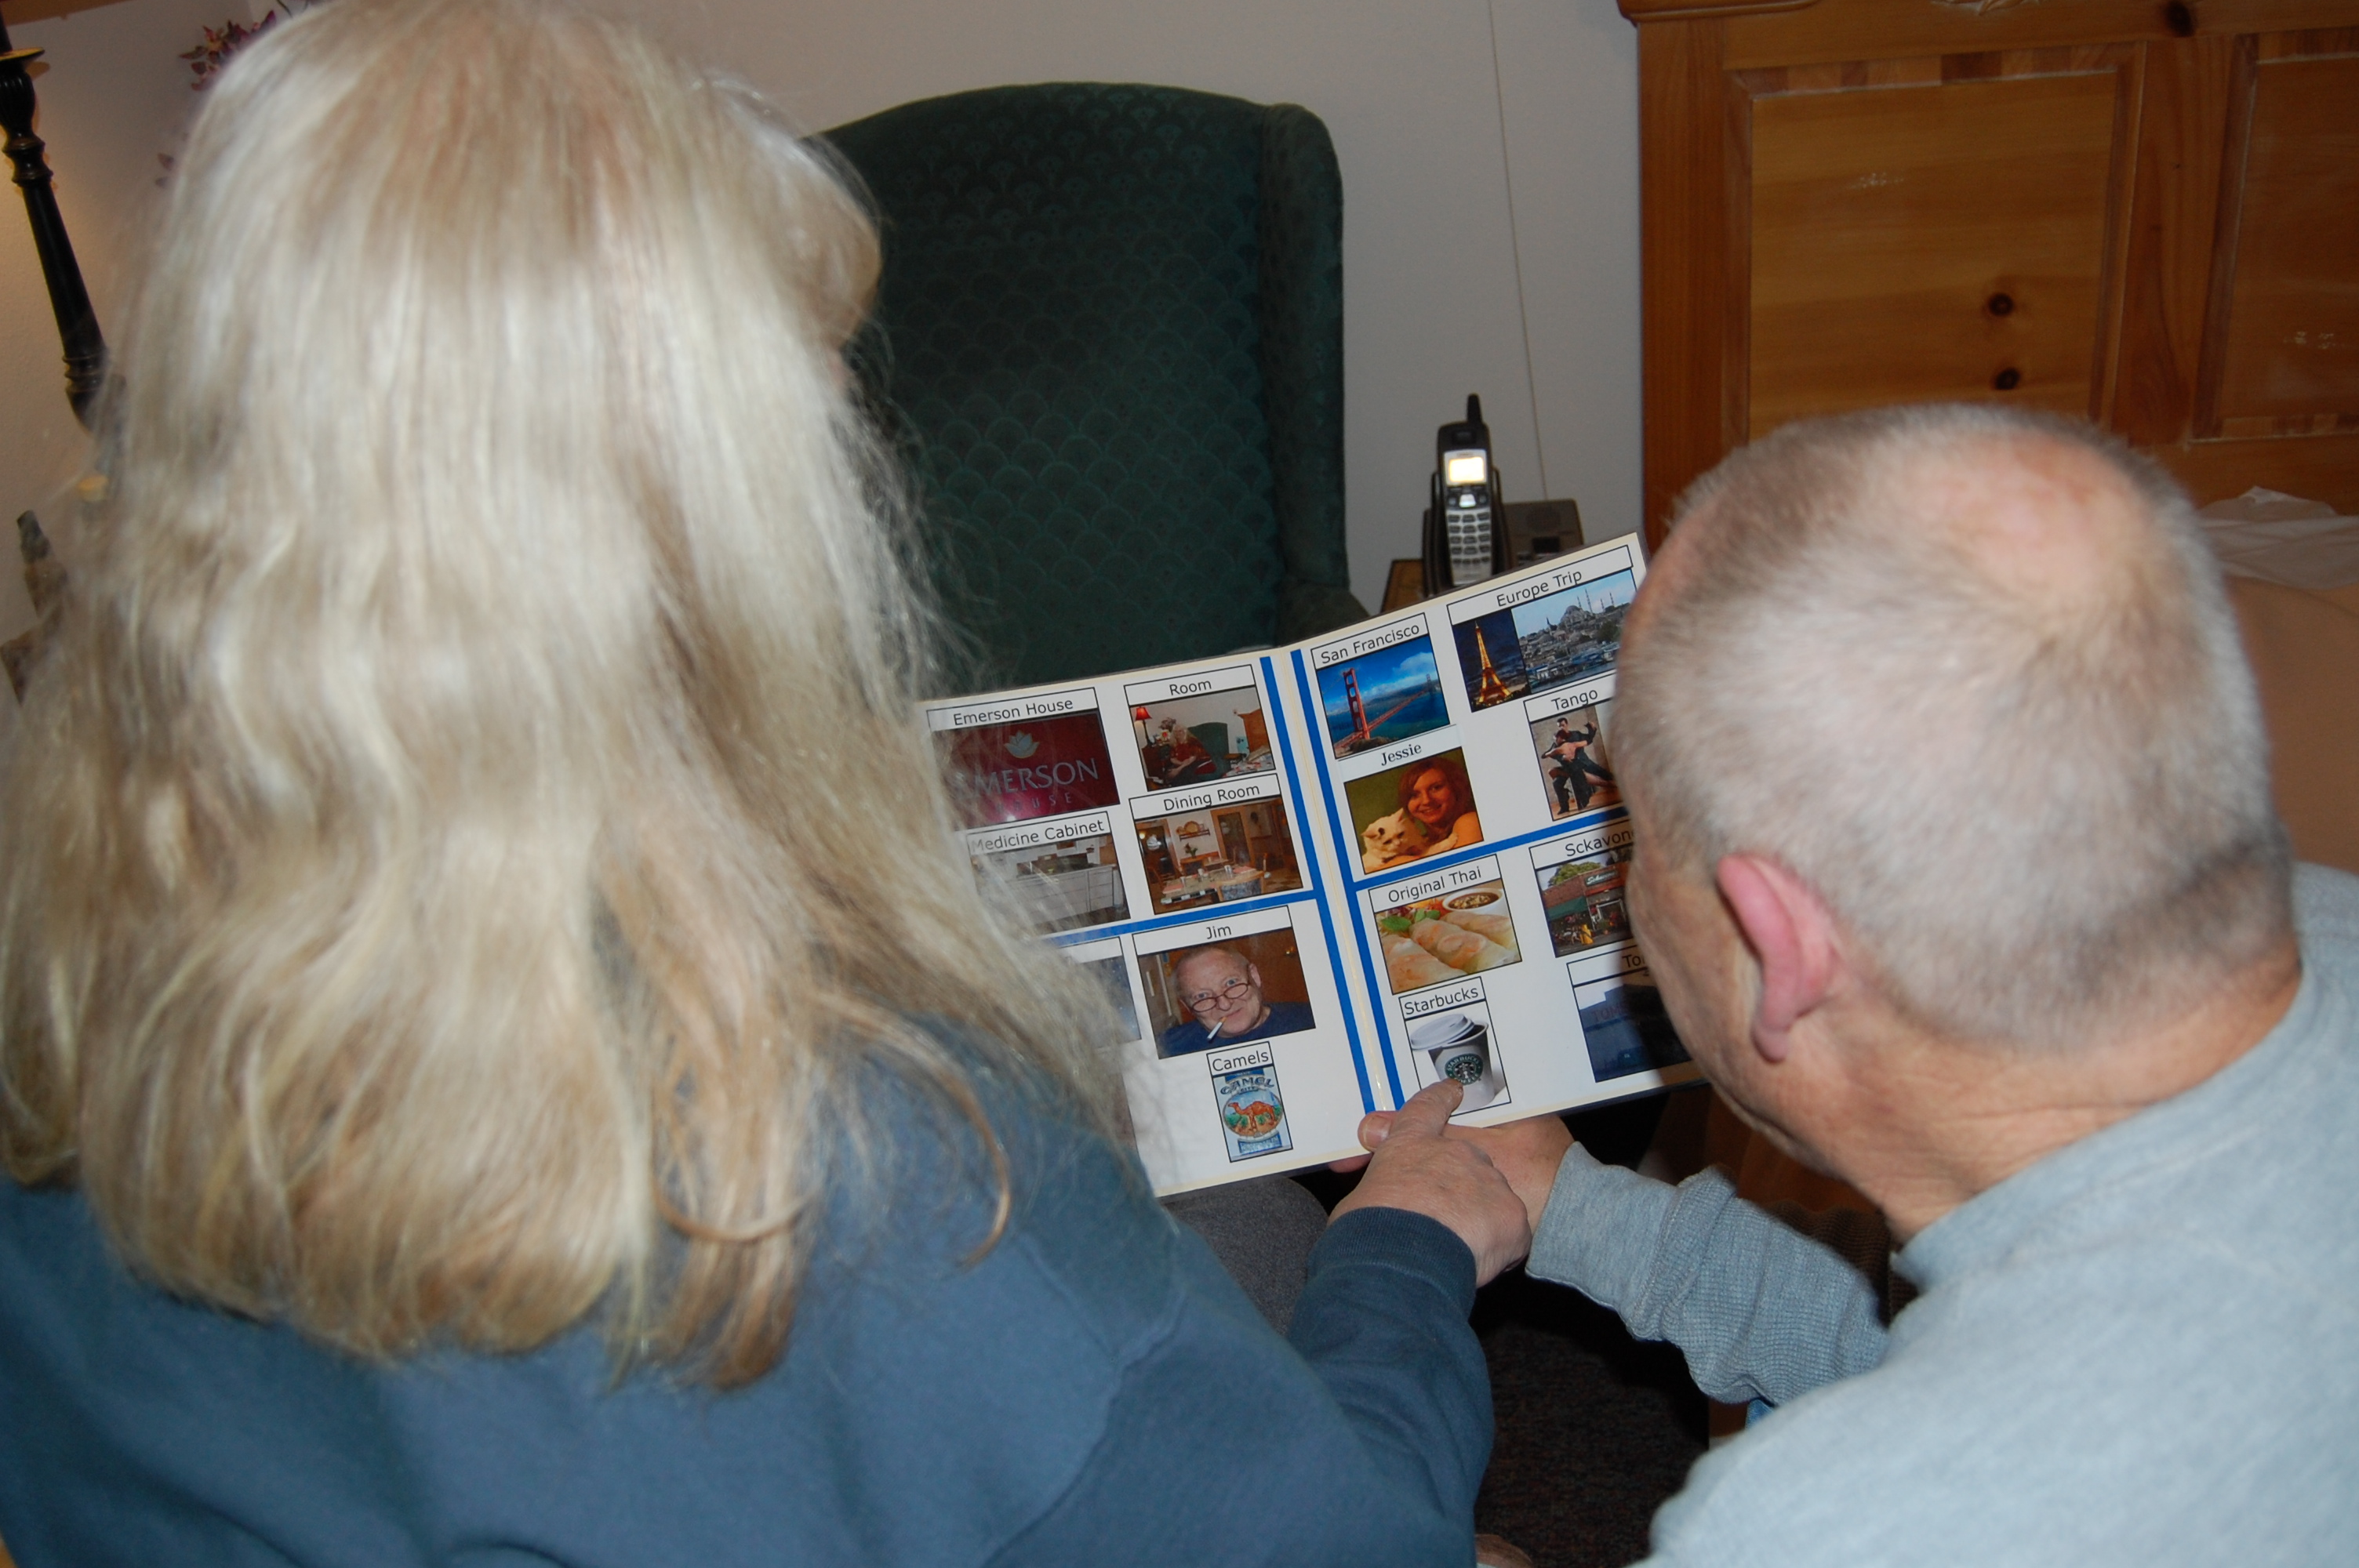 A woman and man with gray hair using an image grid